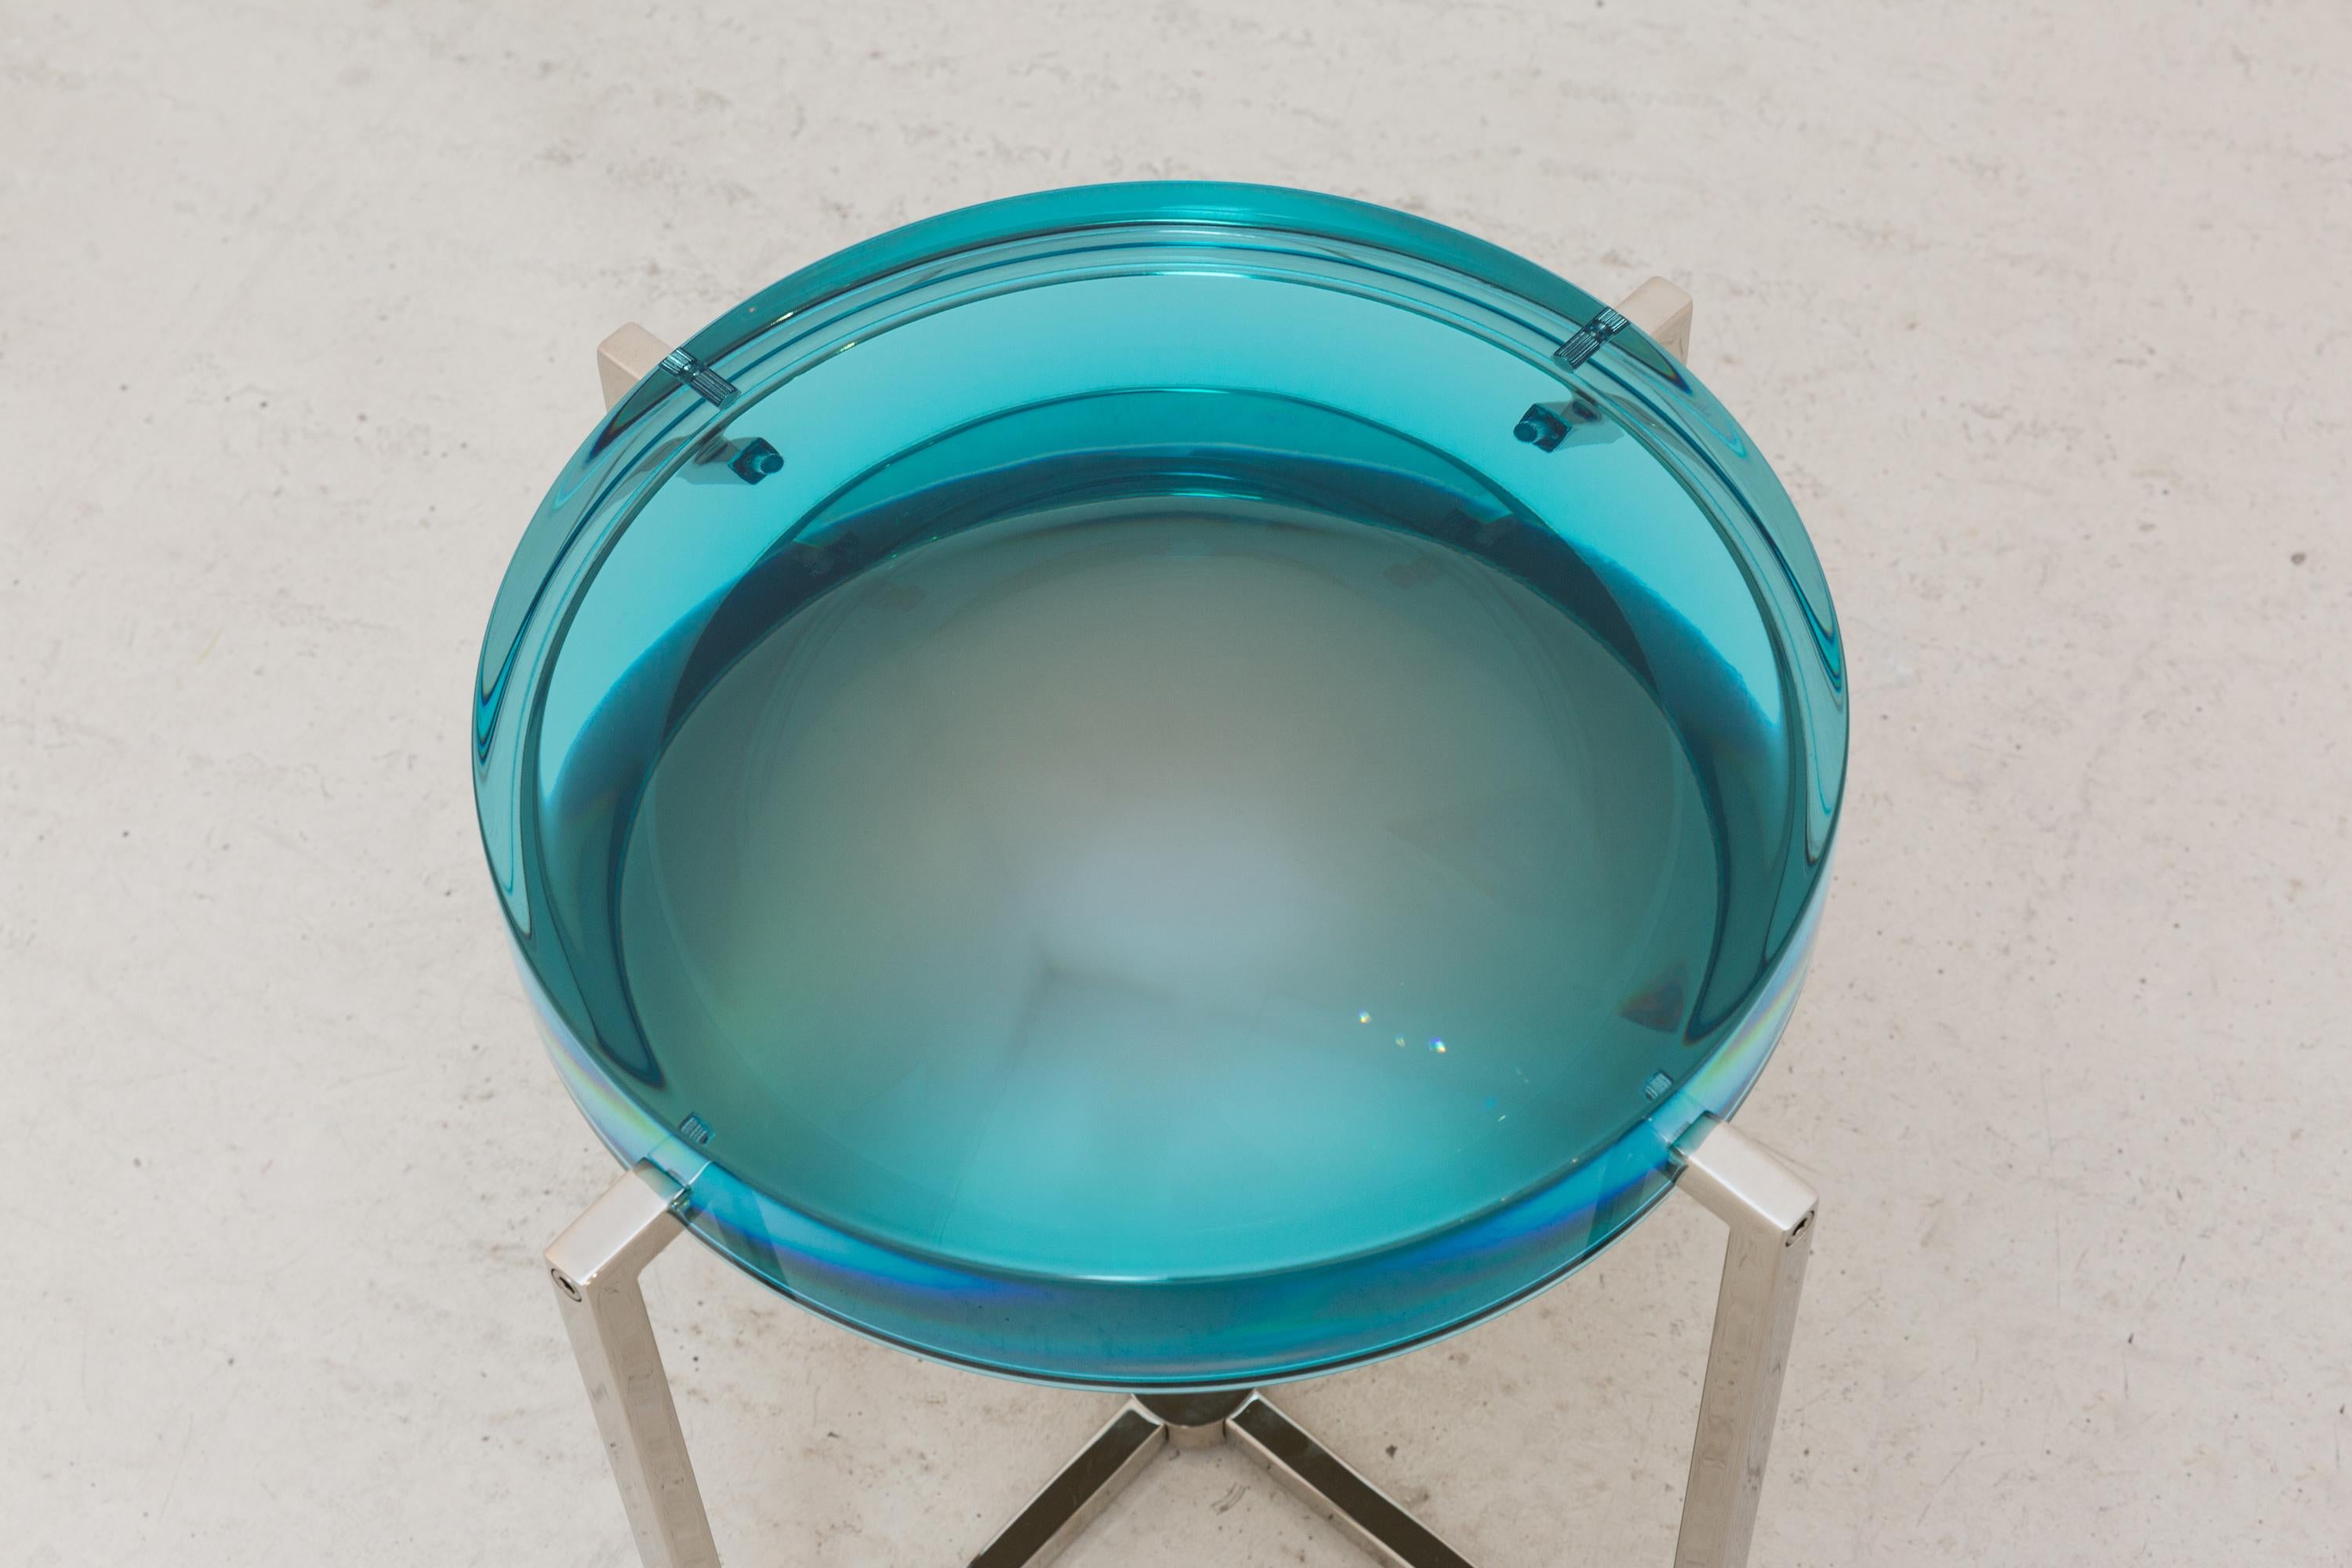 McCollin Bryan lens table in turquoise. Resin top backed by acrylic mirror on nickel base with four legs.